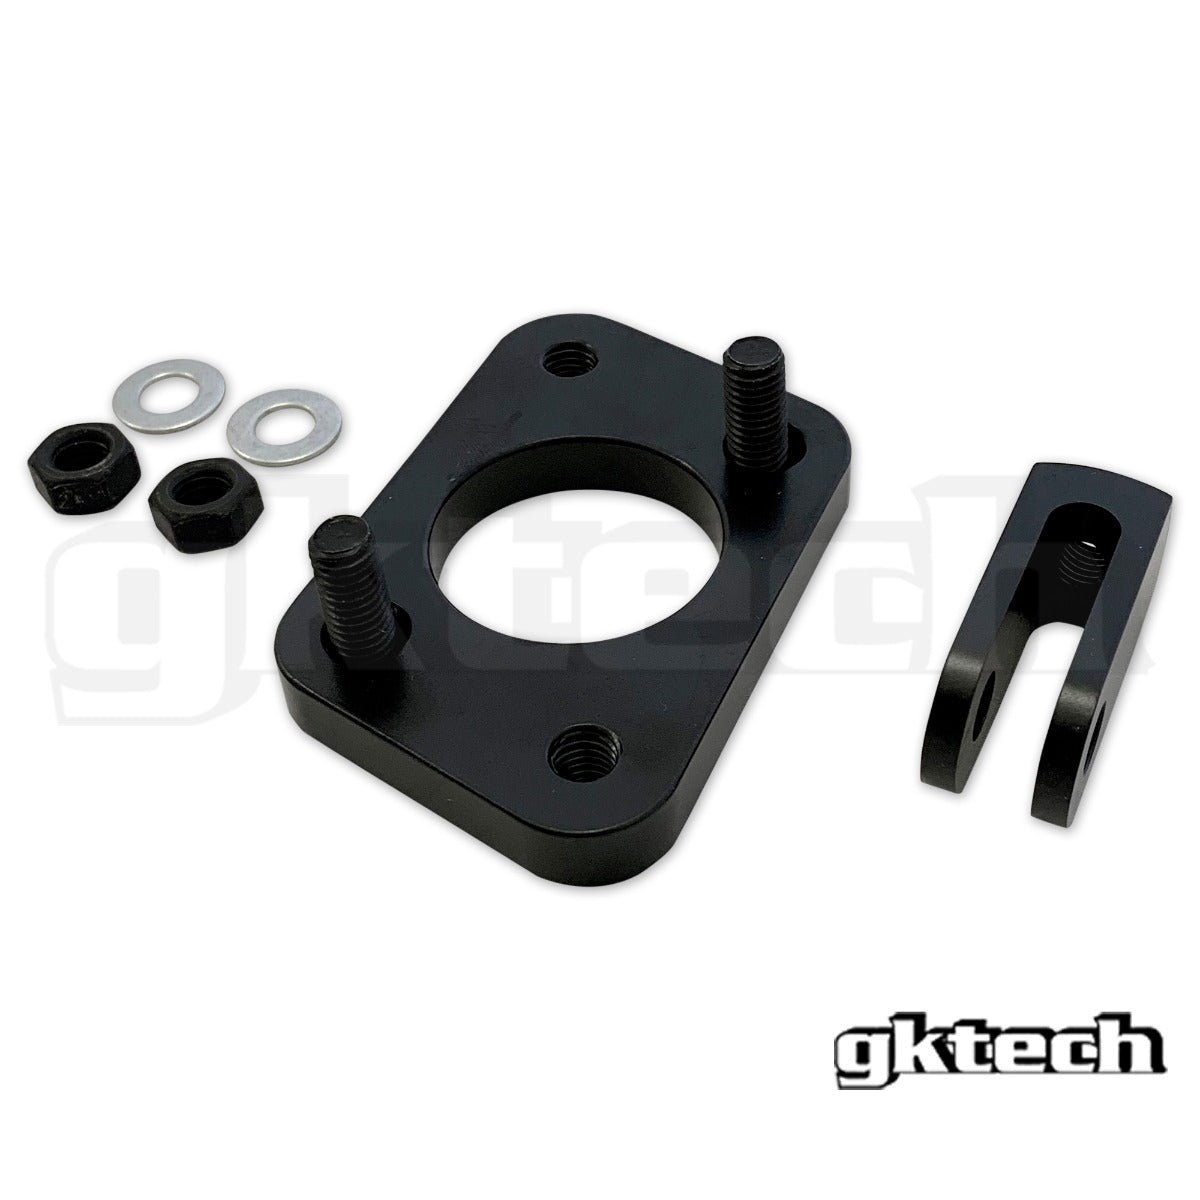 Clutch Master cylinder adapter to suit Z33 350Z